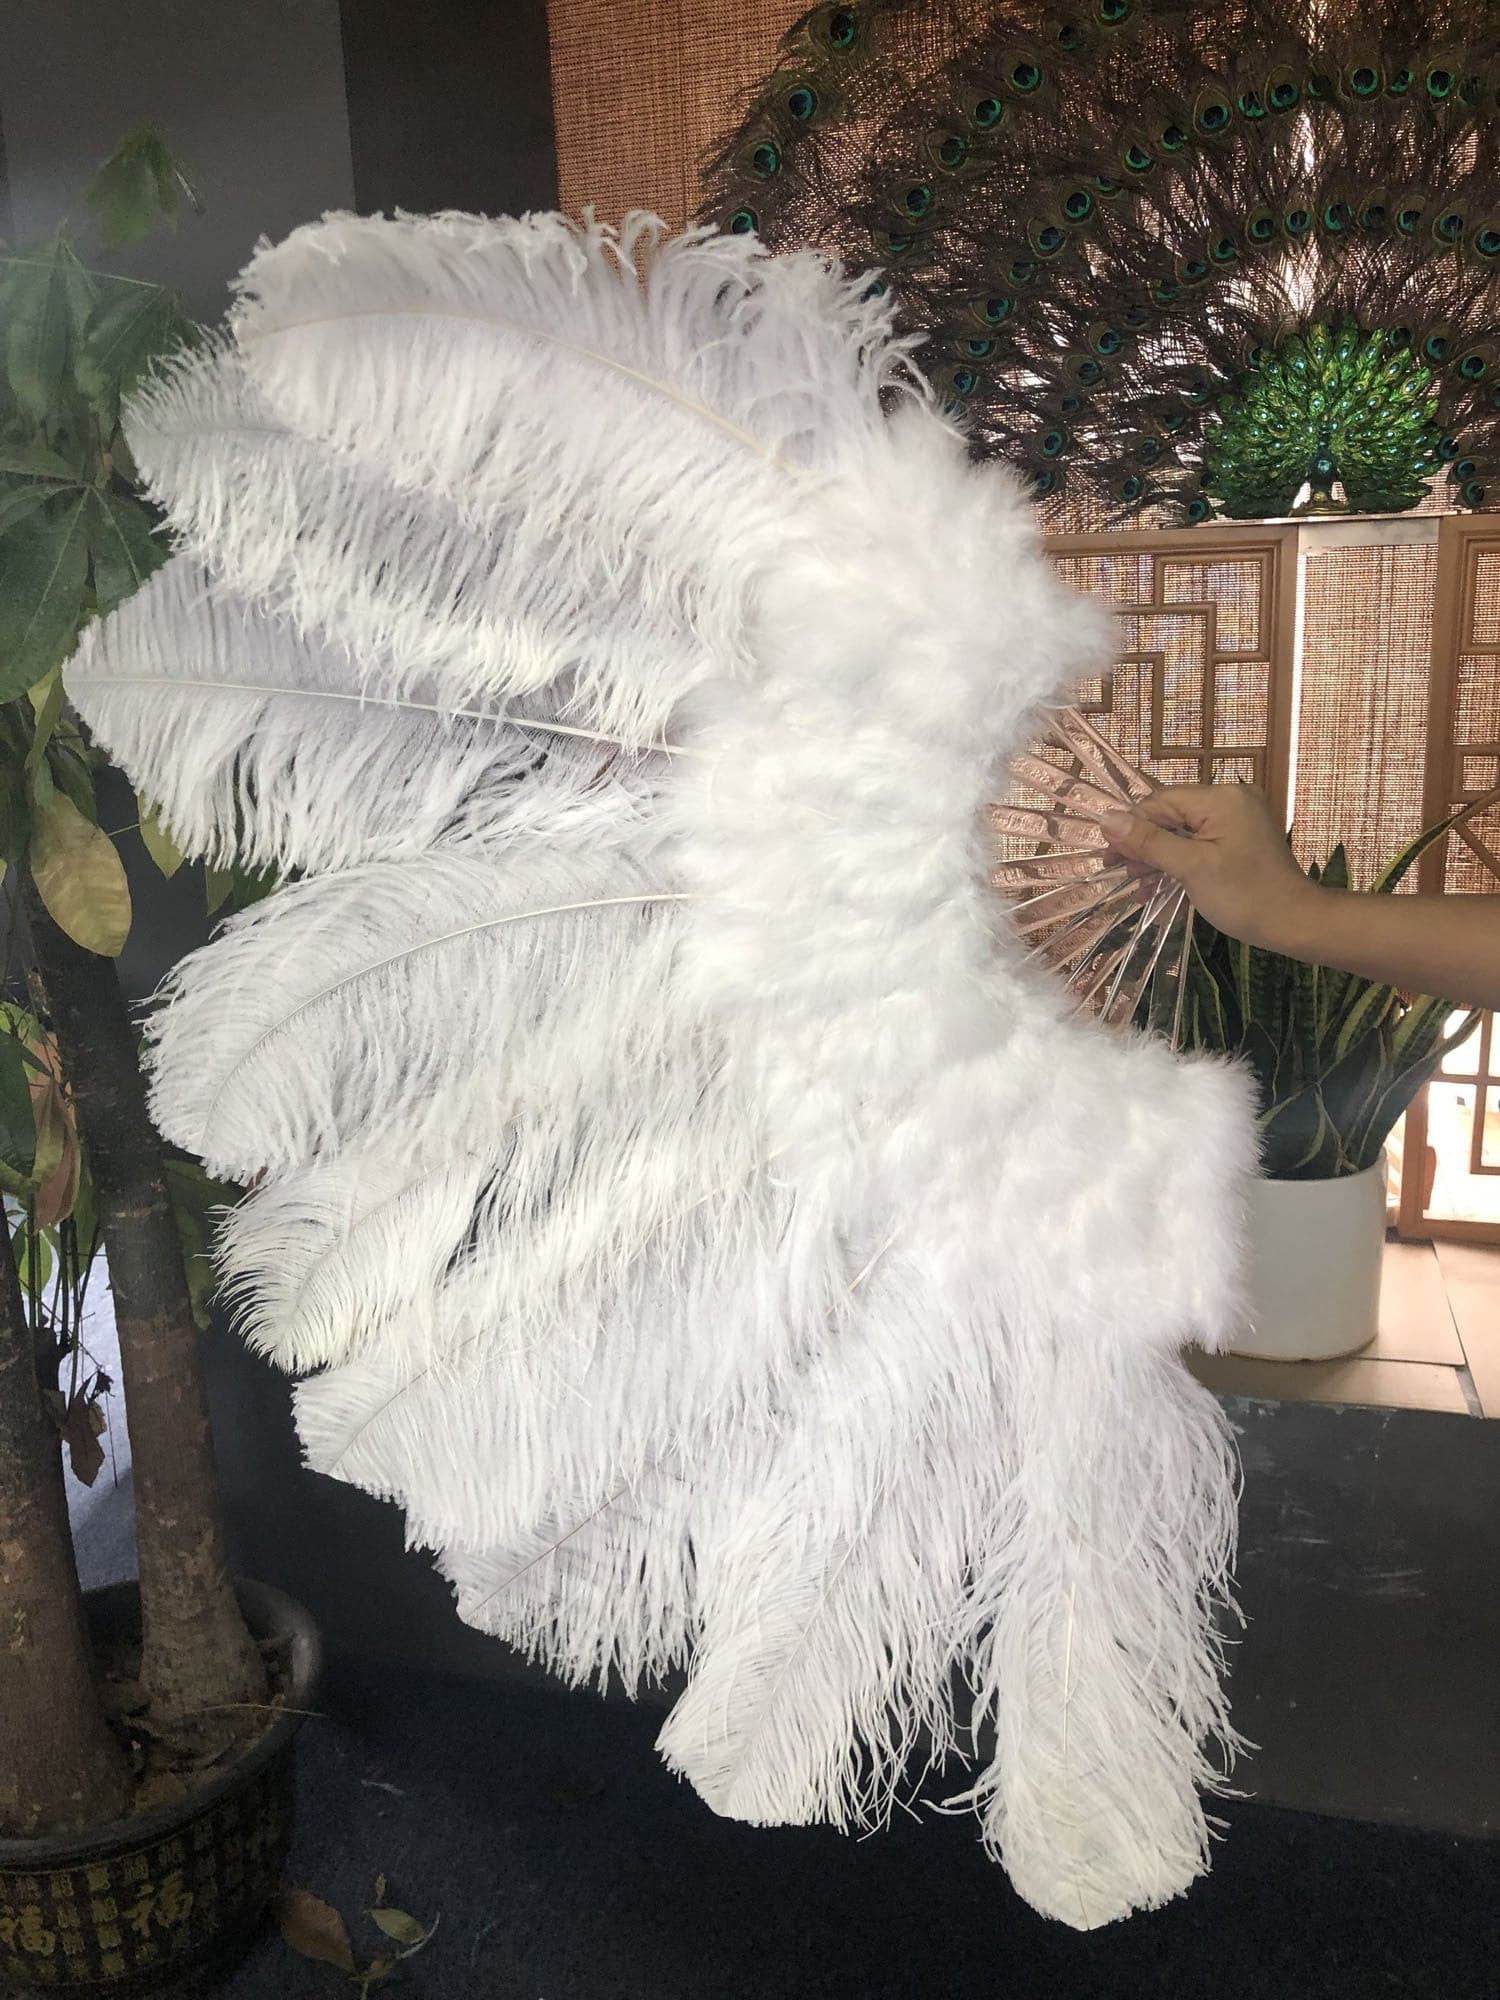 Mix Black & White Marabou Ostrich Feather Fan 21x 38 with Travel Leather Bag, Right Hand Fan